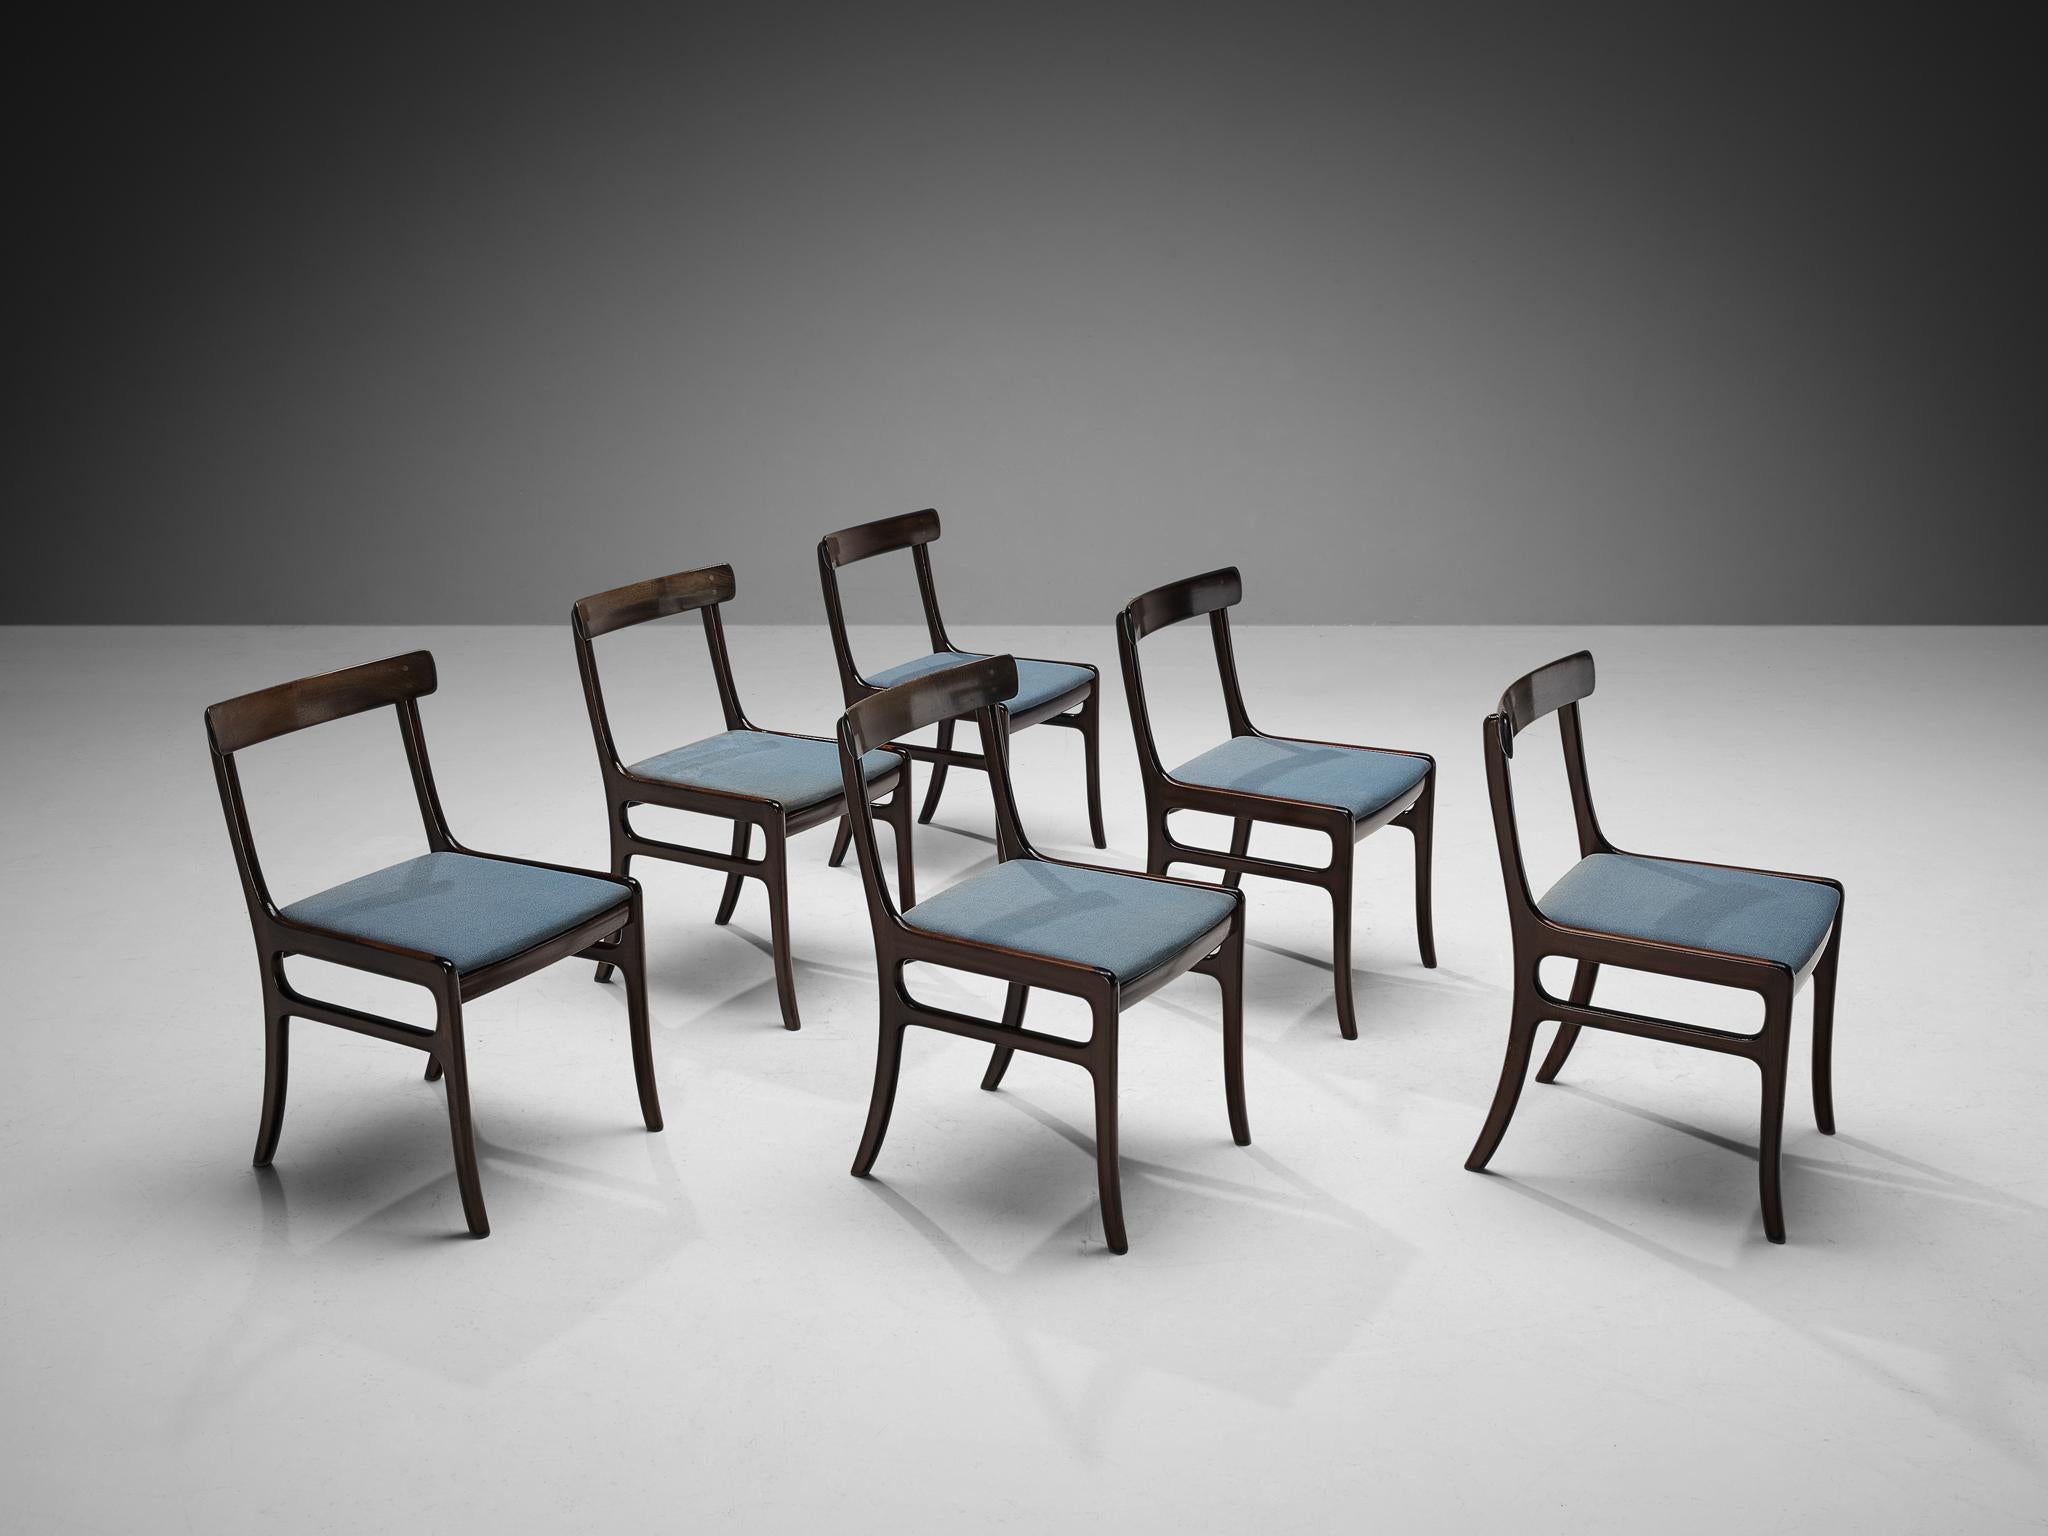 Ole Wanscher for P. Jeppesen, set of six dining chairs, model 'Rungstedlund' PJ 34, St. Heddinge, mahogany, blue upholstery, Denmark, 1960s.

These classic dining chairs are designed by the Danish designer Ole Wanscher and feature a slightly